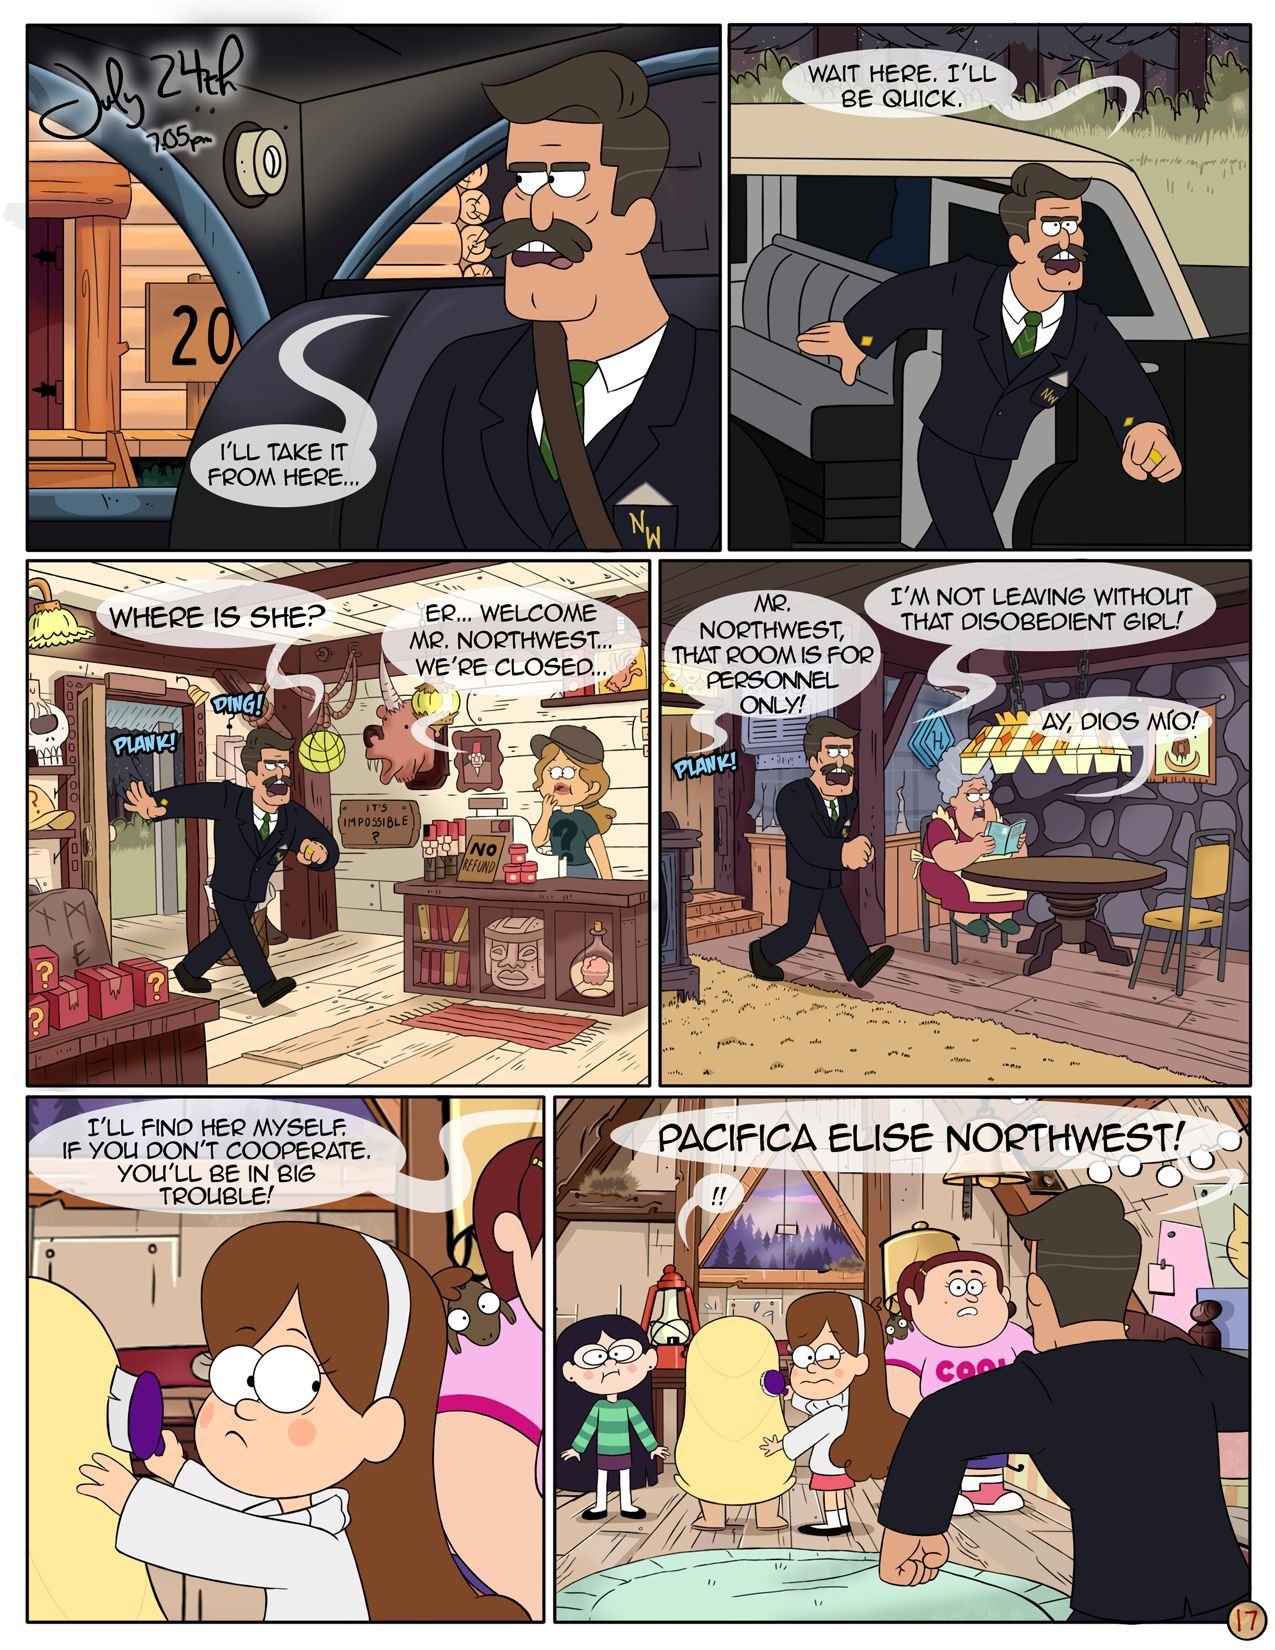 [Area] Next Summer (Gravity Falls) [Ongoing] 18